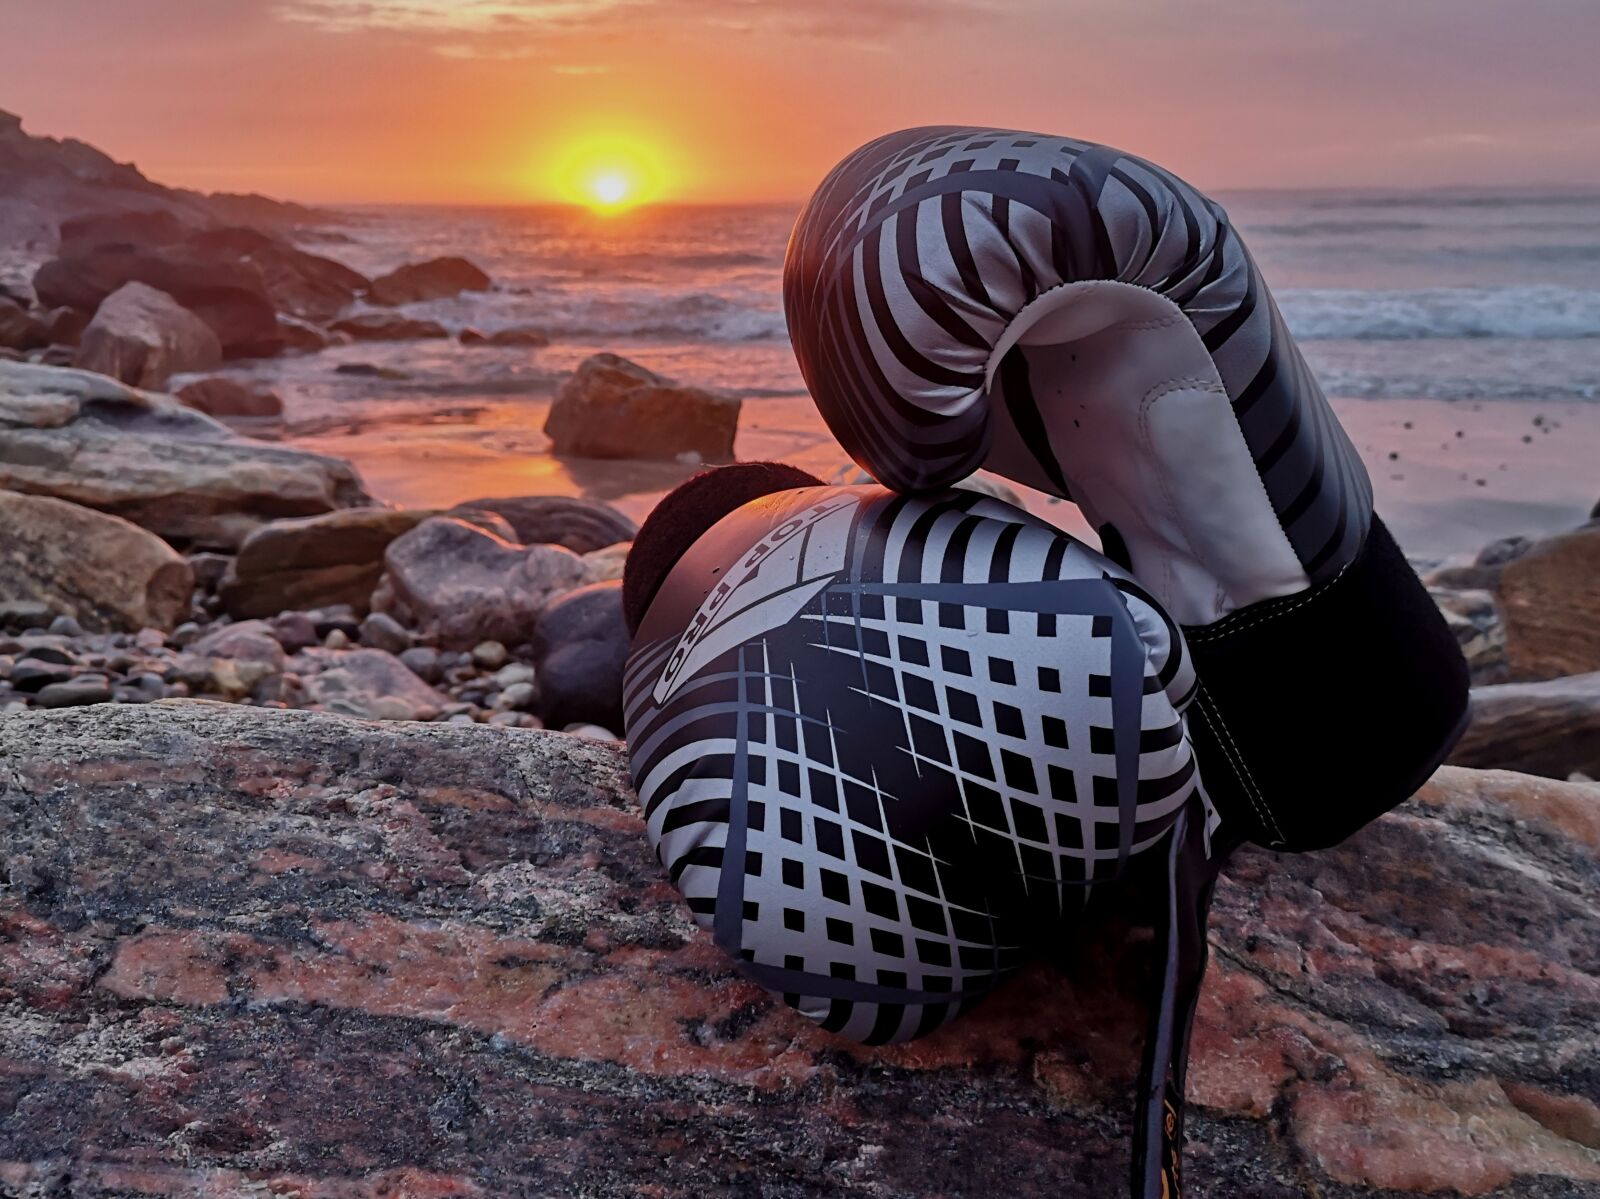 HUAWEI P20 sample photo. Boxing gloves, sport, sunset photography